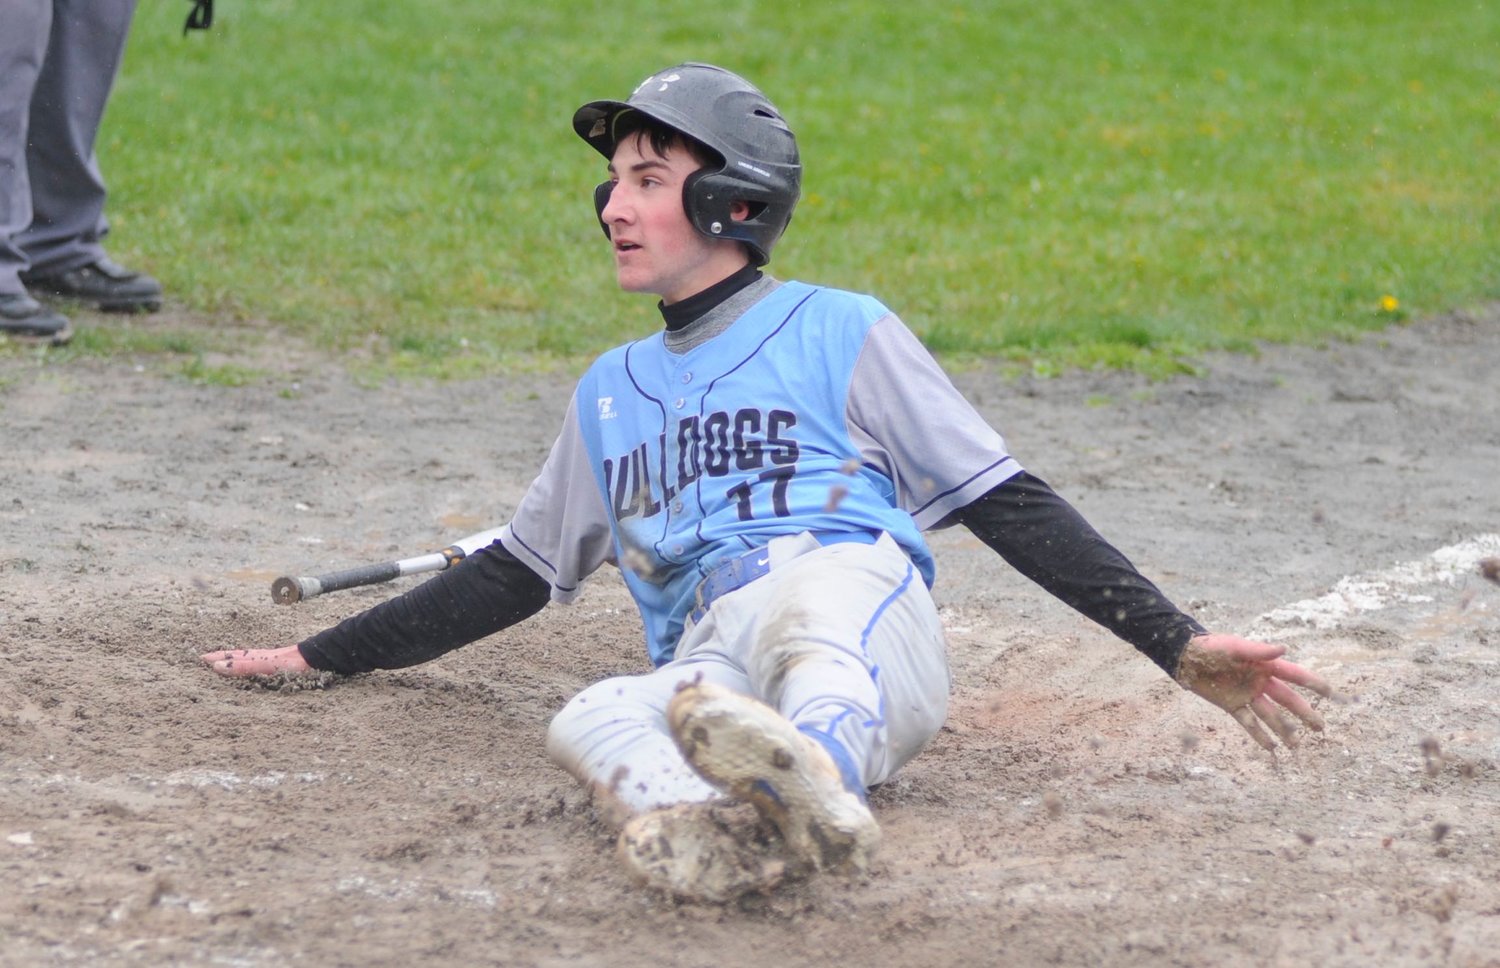 Solo score. In the third inning, Sullivan West’s Andrew Hubert slides home for the Bulldog’s only score in the game.